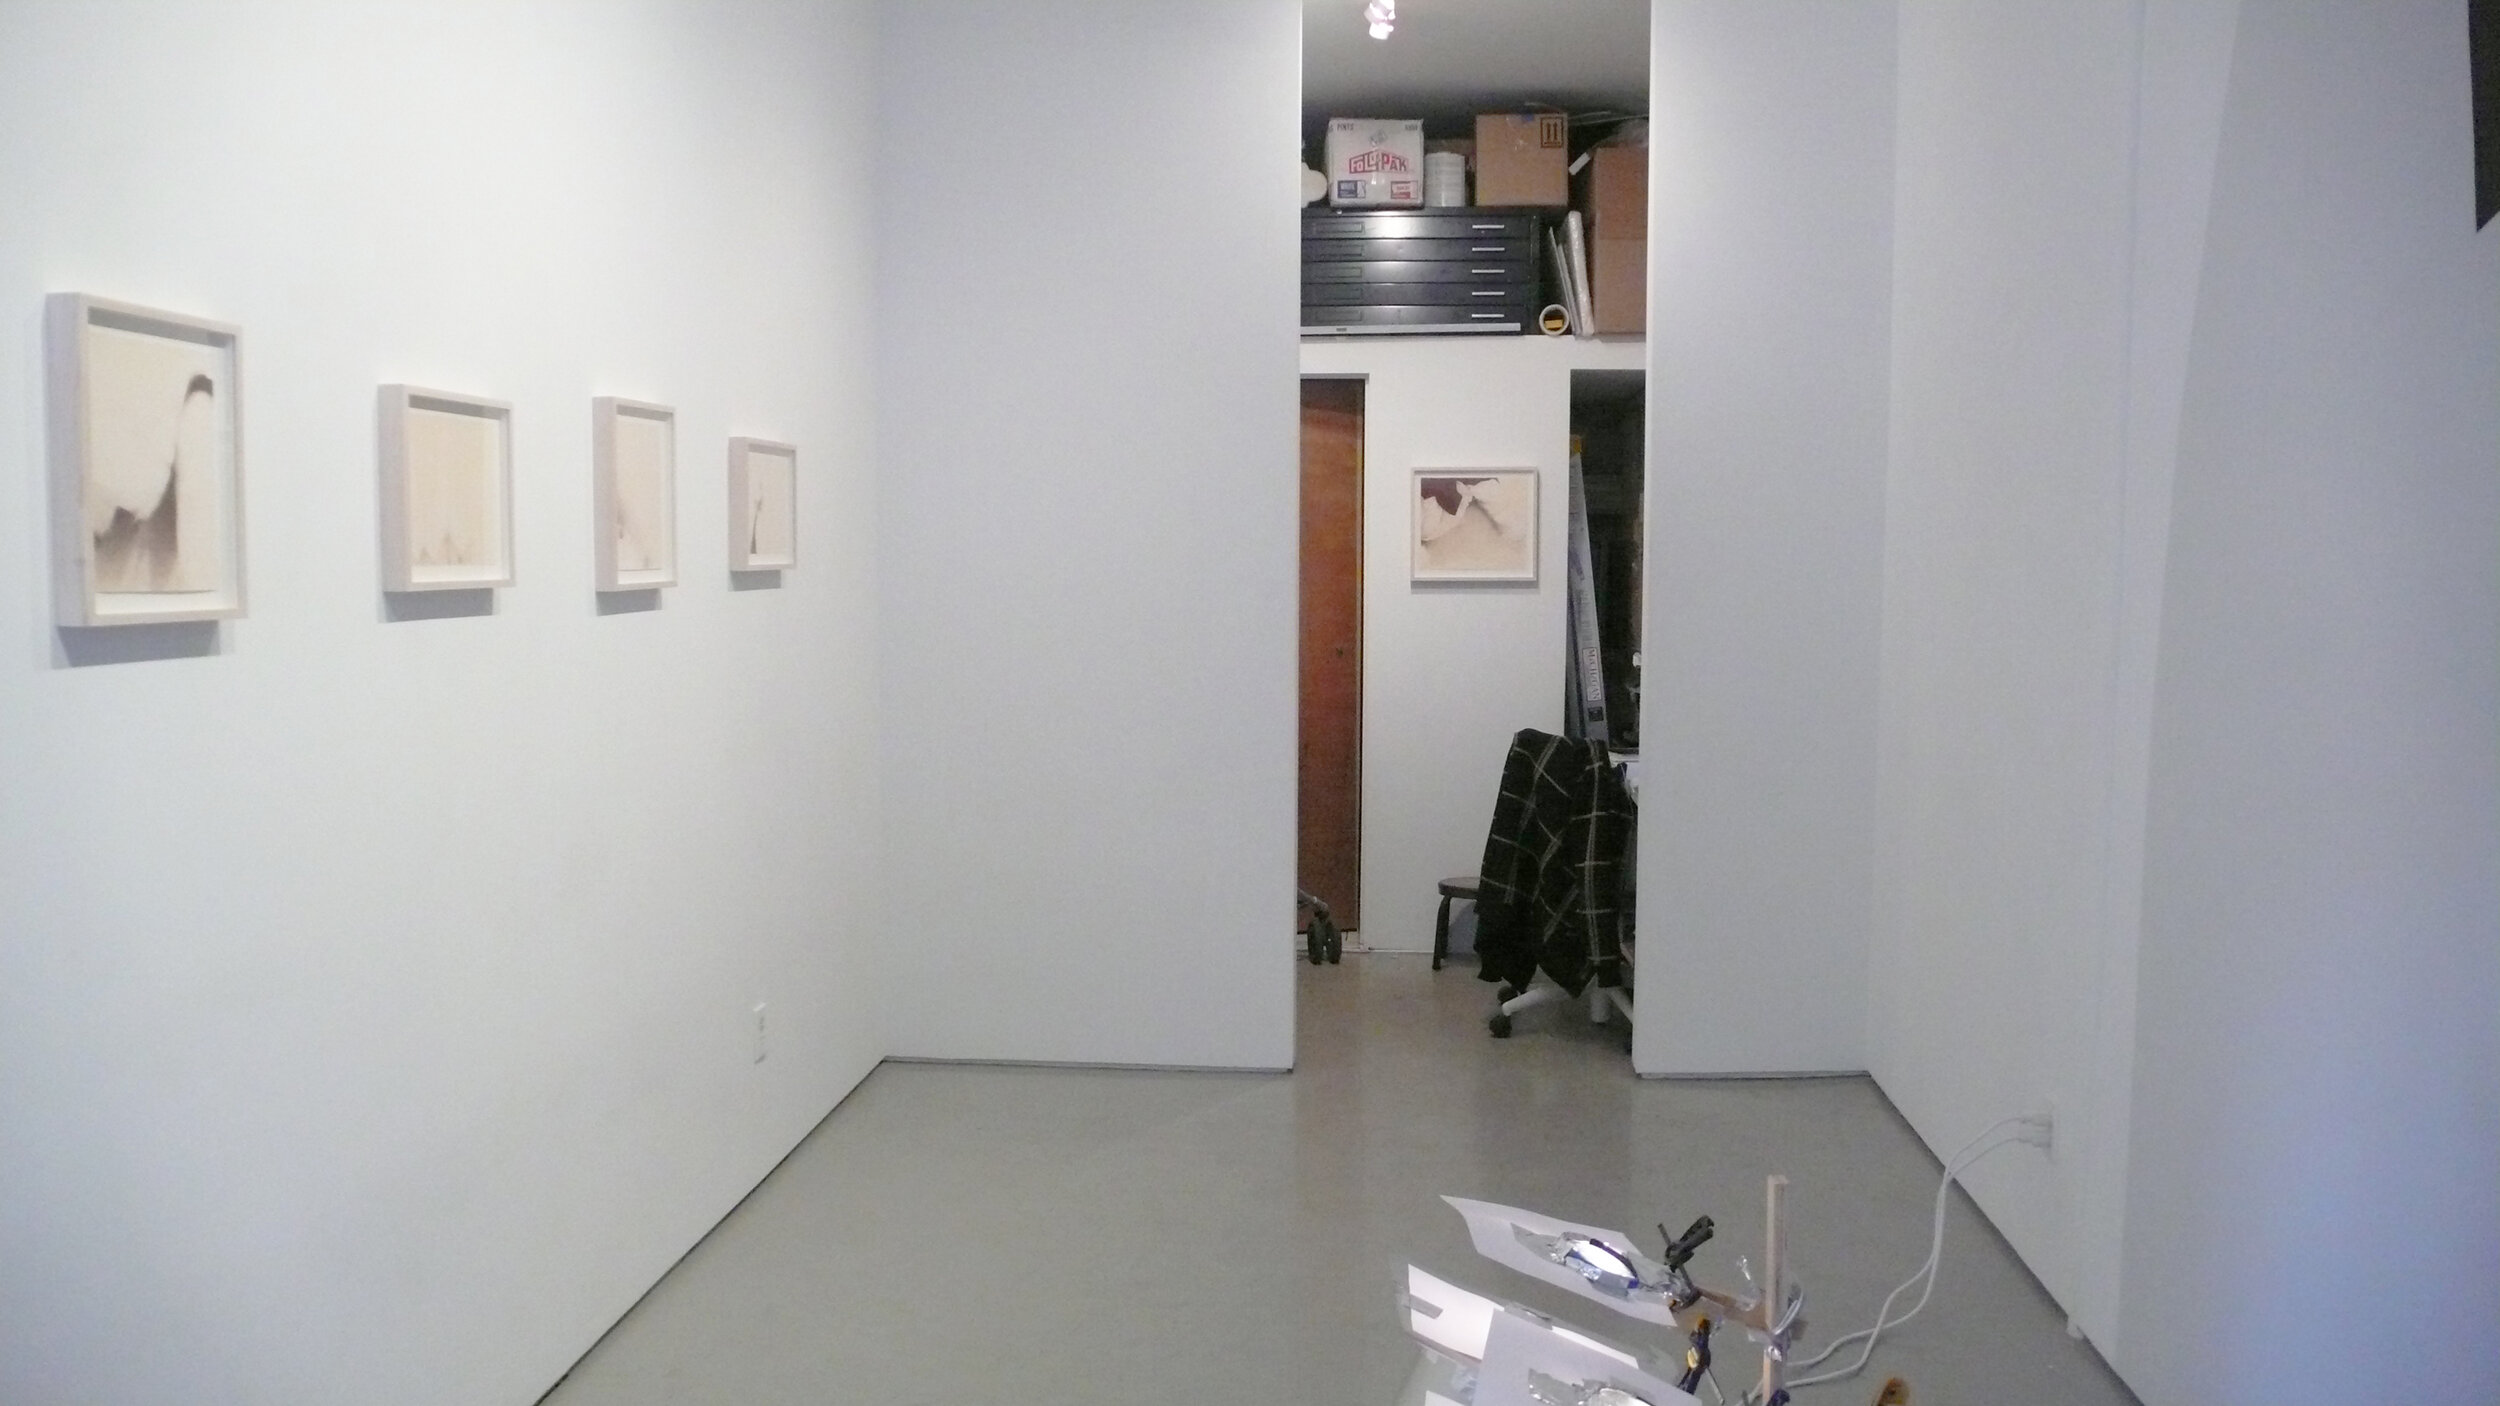 Installation image from the 2008 Adam Hayes exhibition, Access to the Magnificent Room, at Cindy Rucker Gallery, Number 35